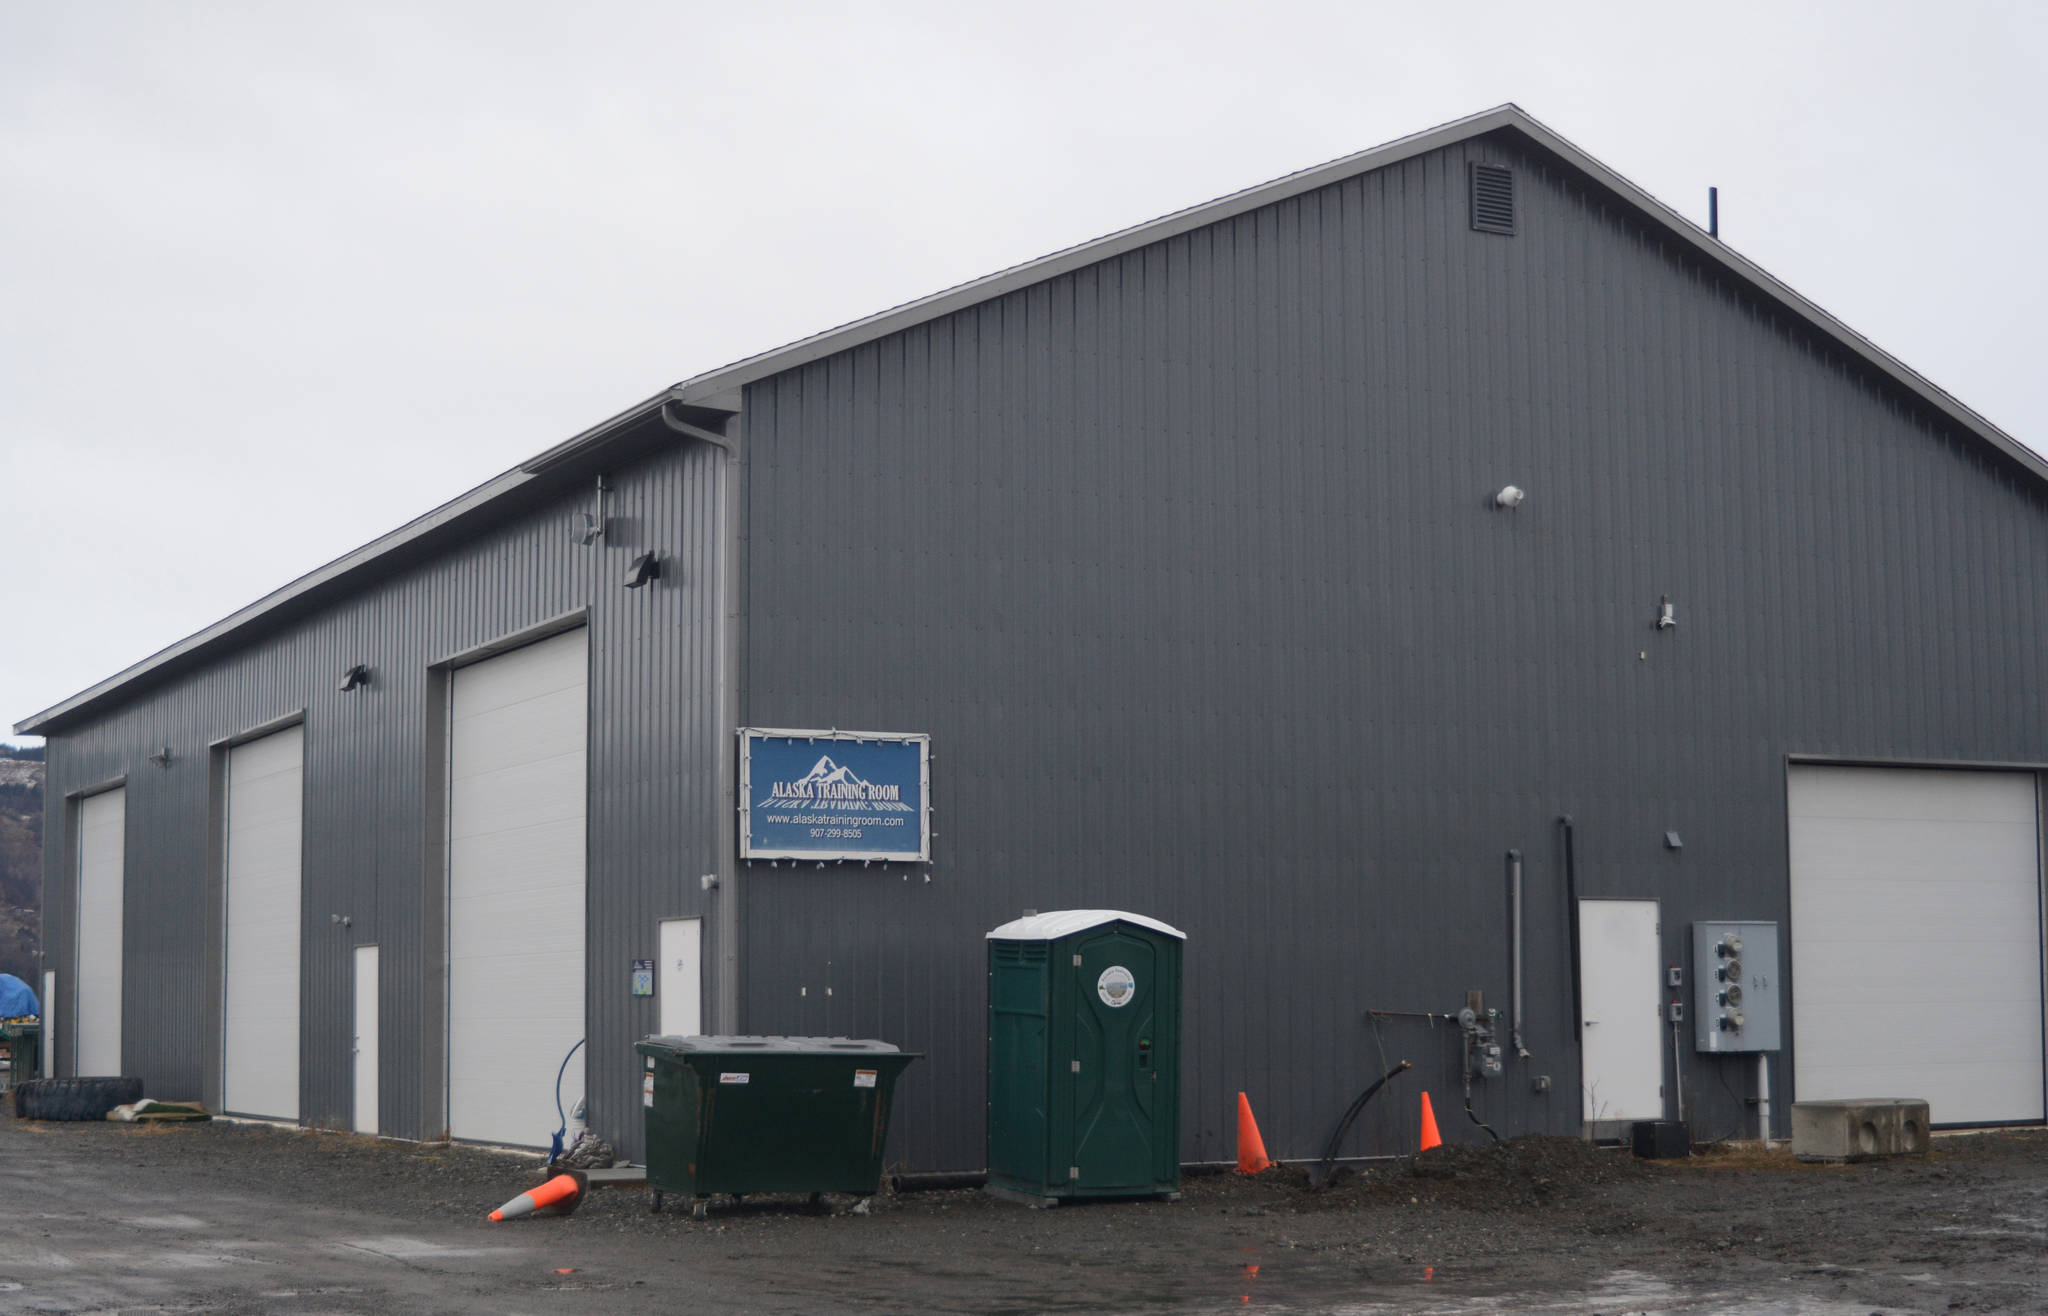 In this photo taken in January, Alaska Loven It plans to operate a marijuana standard cultivation facility in this 5,000-square-foot building on Kachemak Drive near the east end of the Homer Airport runway. Alaska Training Room had rented the front space, but moved out in January. (Photo by Michael Armstrong / Homer News).